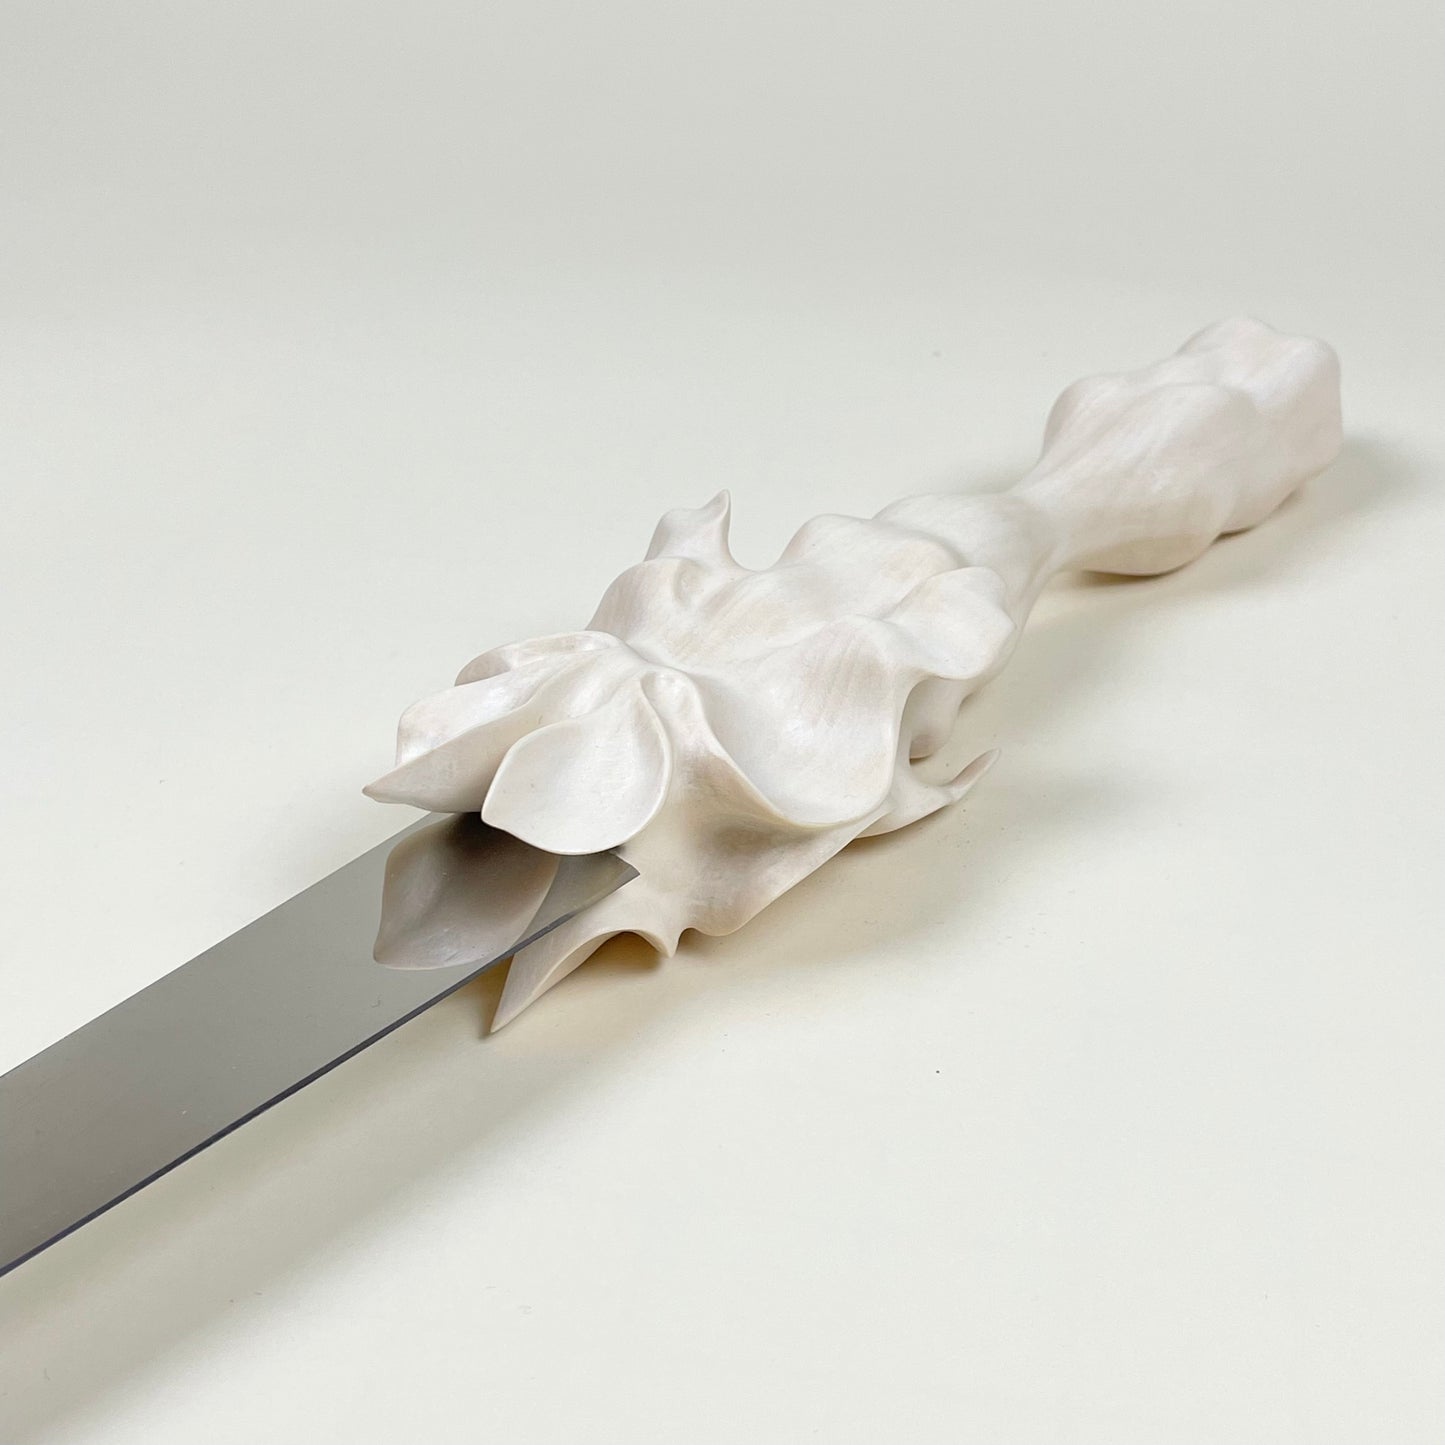 Flower with knife by Sofia Eriksson